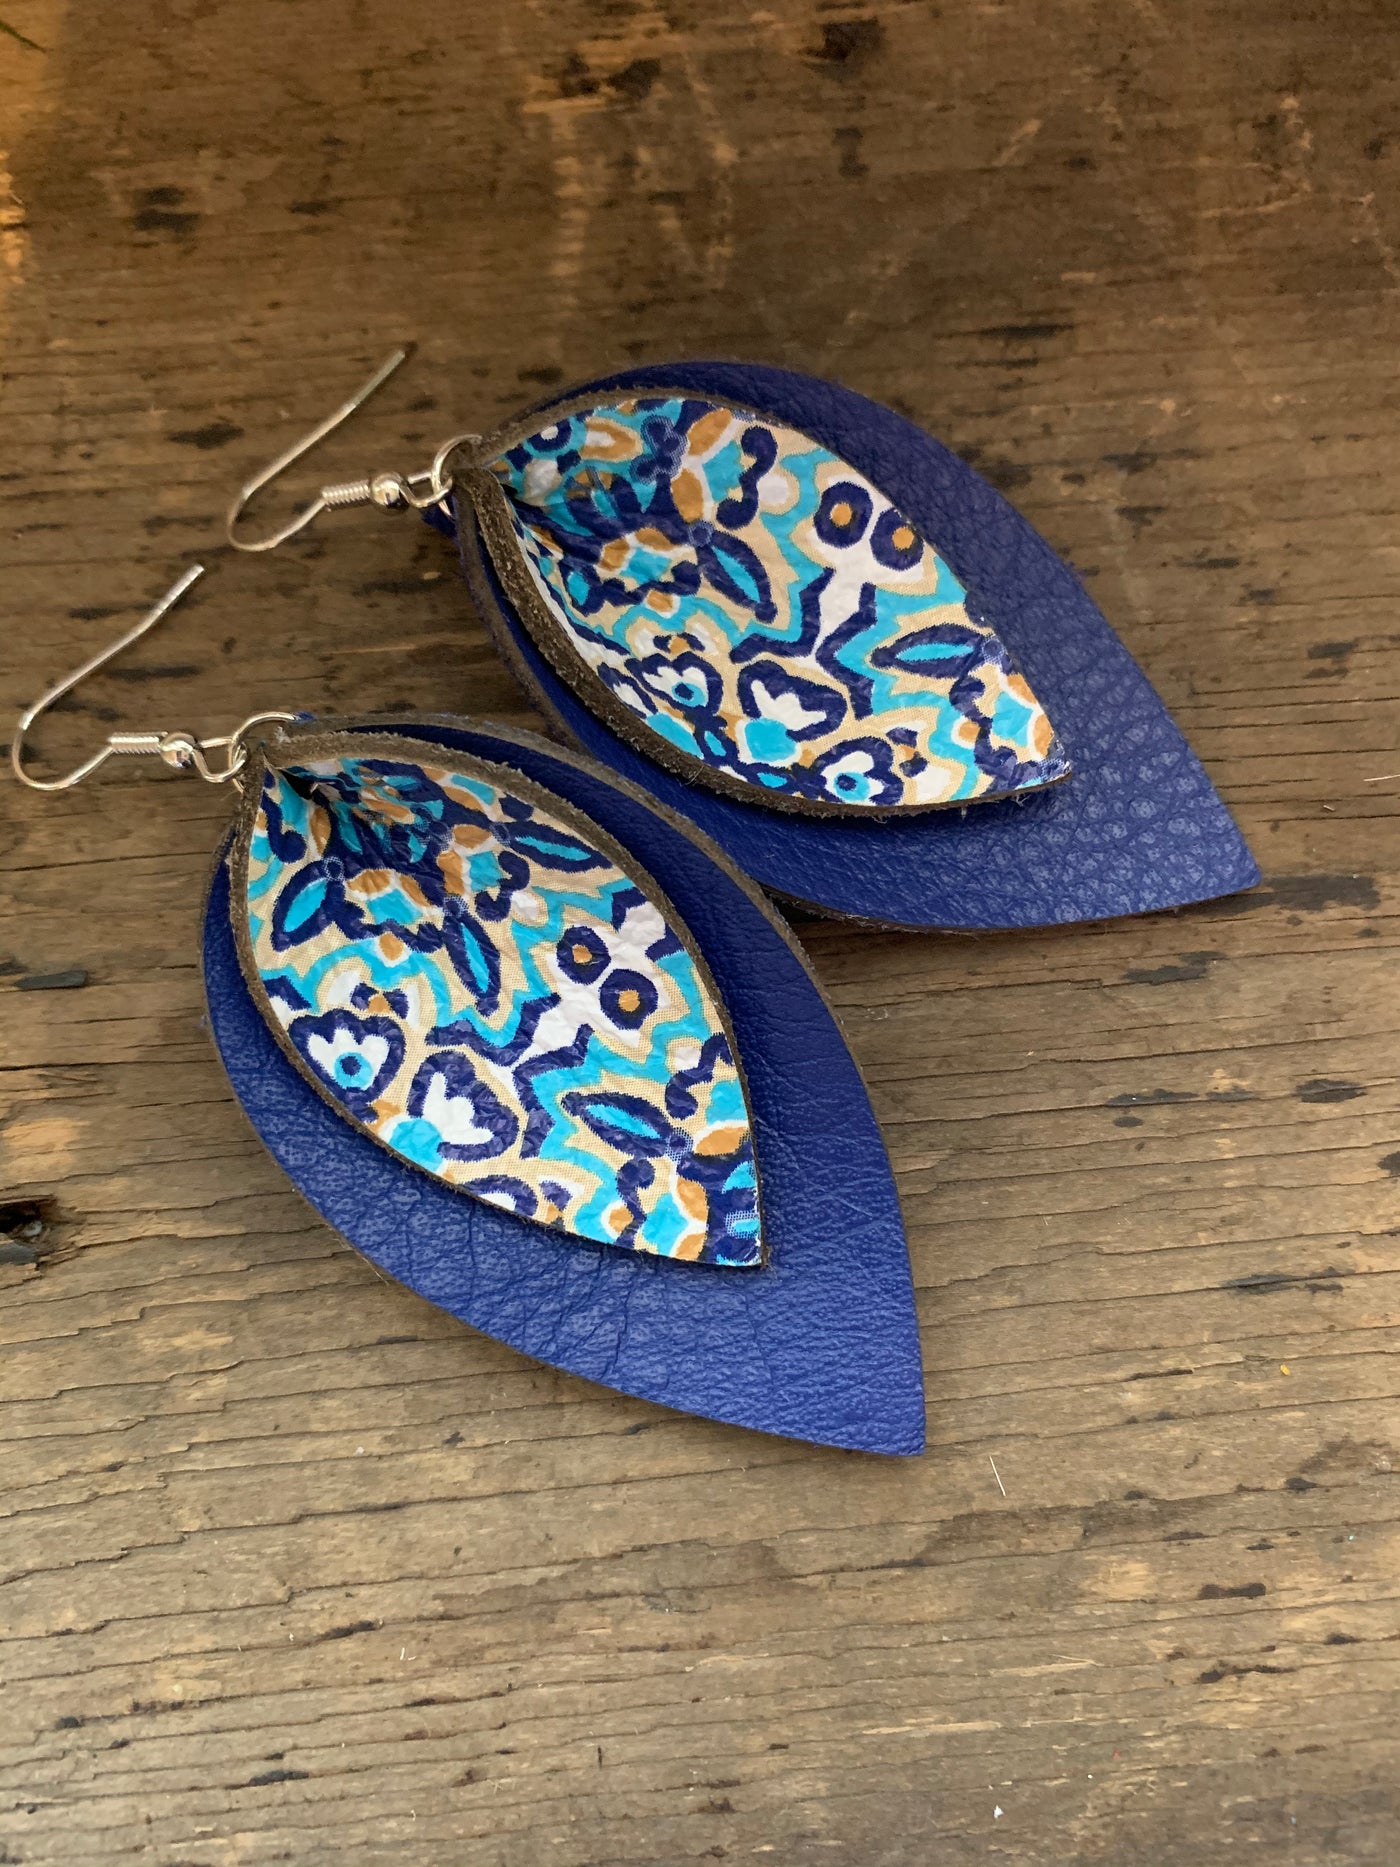 Blue and Teal Mosaic Double Layer Leather Earrings - Jill's Jewels | Unique, Handcrafted, Trendy, And Fun Jewelry